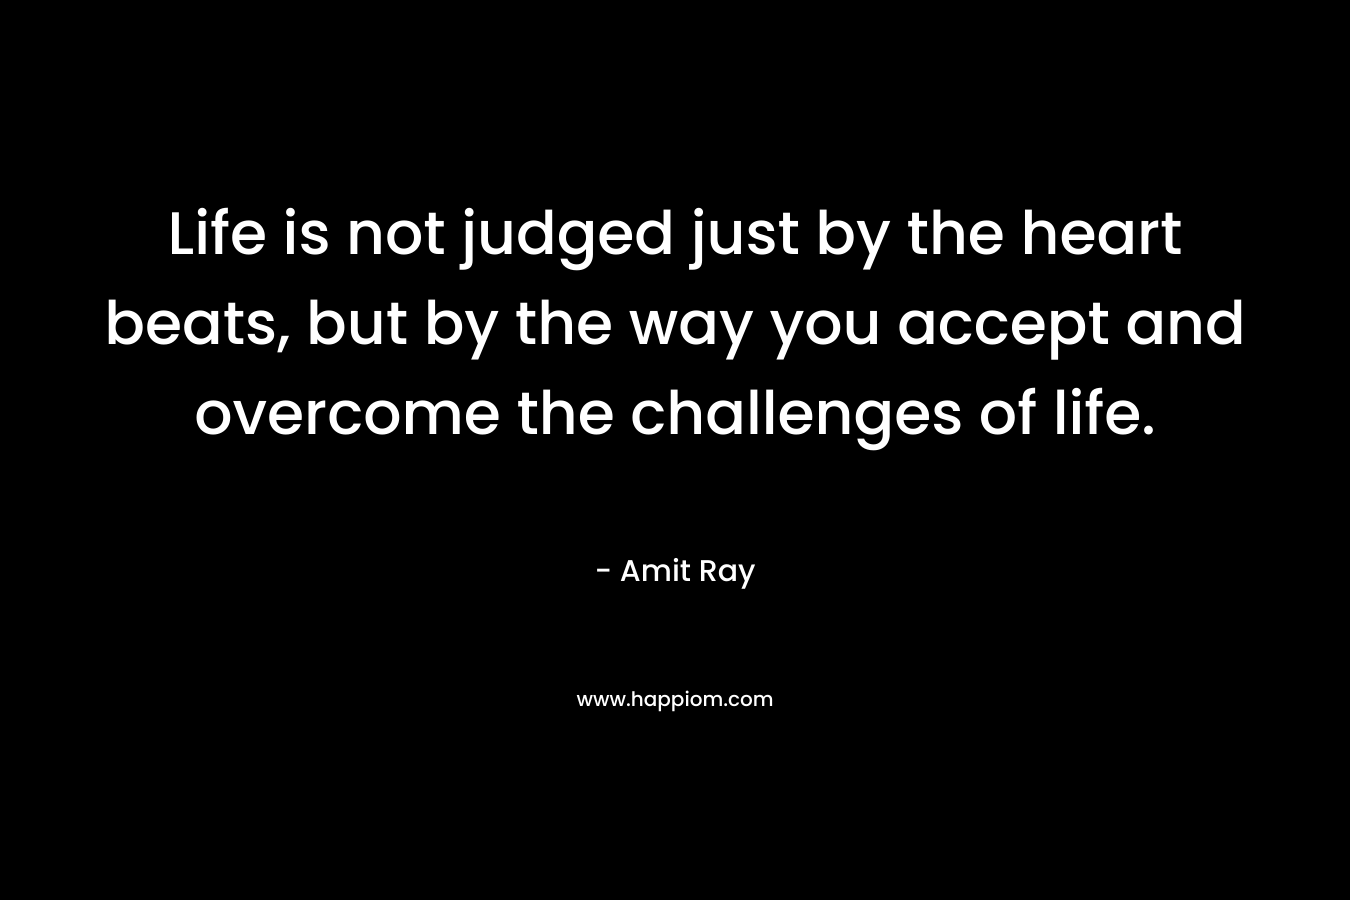 Life is not judged just by the heart beats, but by the way you accept and overcome the challenges of life.